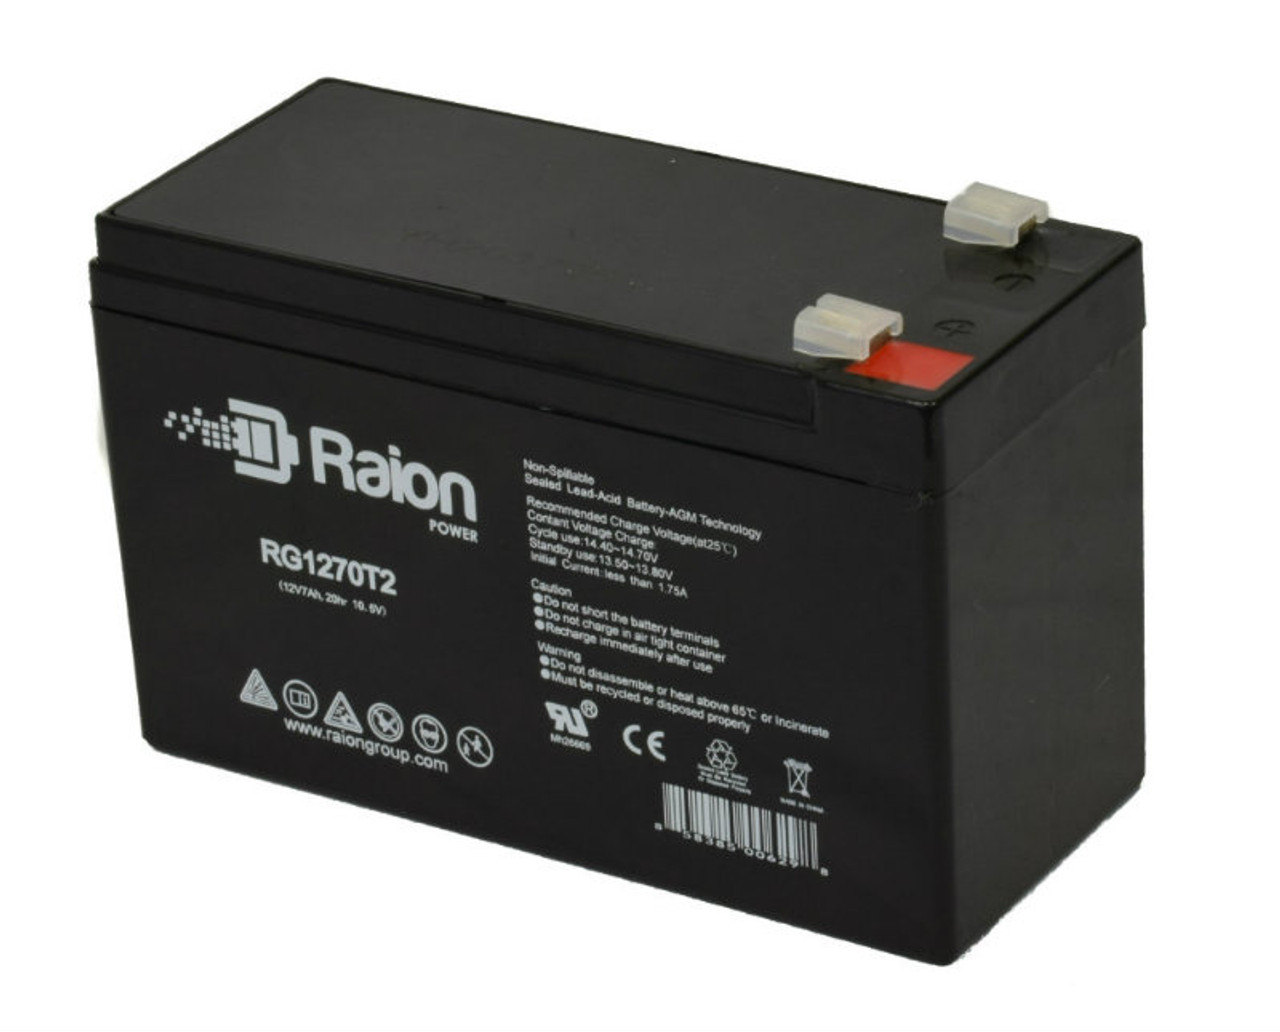 Raion Power RG1270T1 12V 7Ah Non-Spillable Replacement Battery for B&B Battery EVP7-12-F1